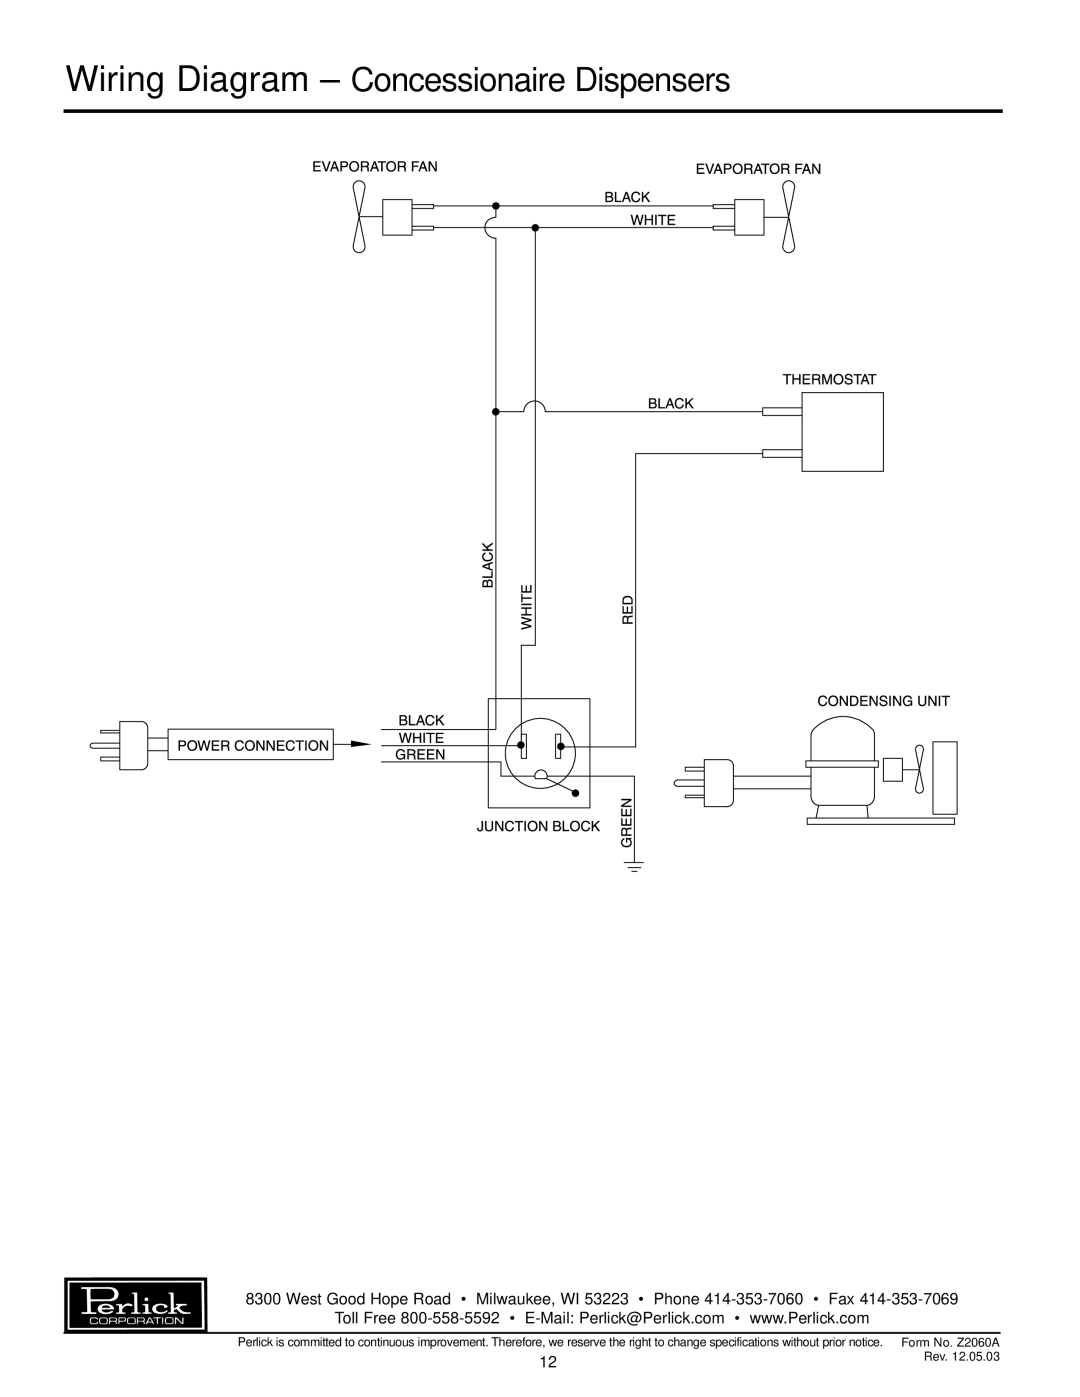 Perlick DC Series specifications Wiring Diagram - Concessionaire Dispensers 